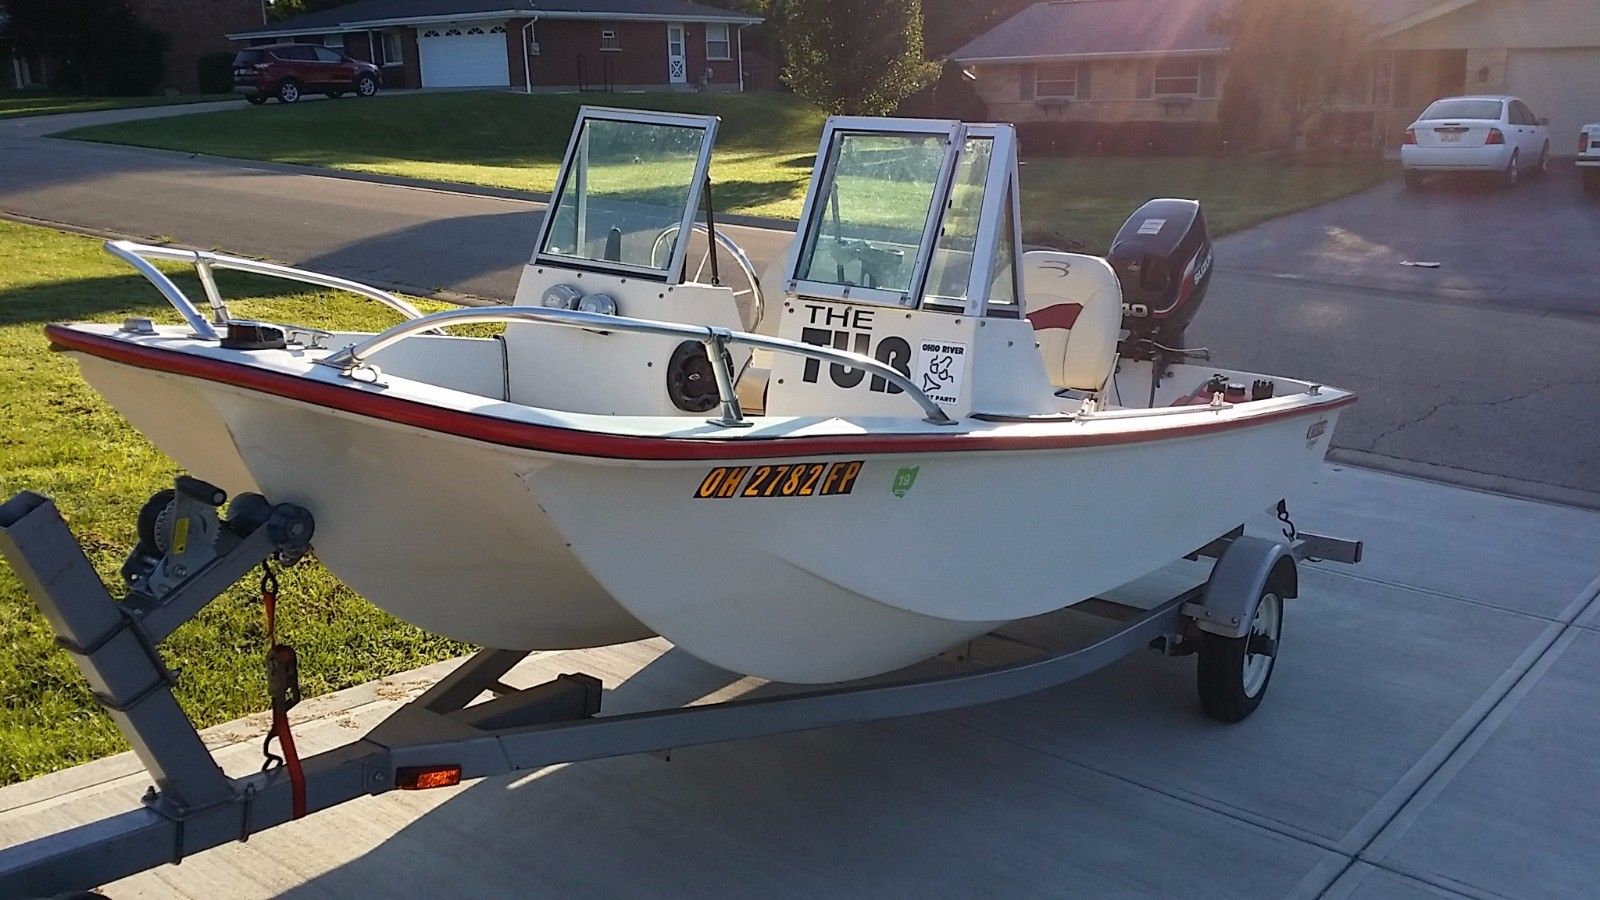 fishing boats for sale in ohio - offerup